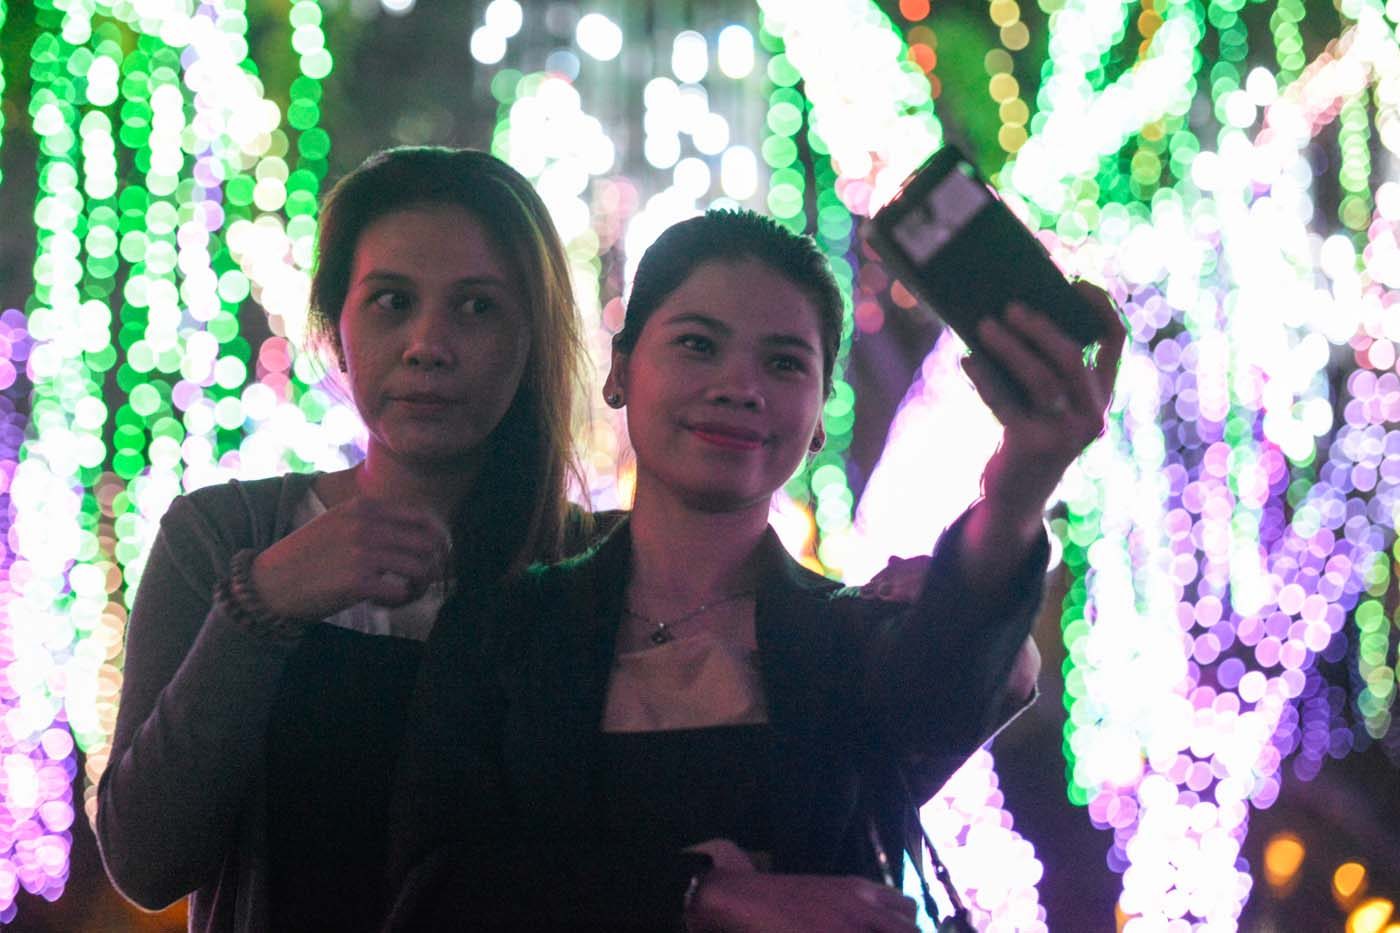 IN PHOTOS: ‘Festival of Lights’ show at Ayala Triangle Gardens back for 2015 holidays